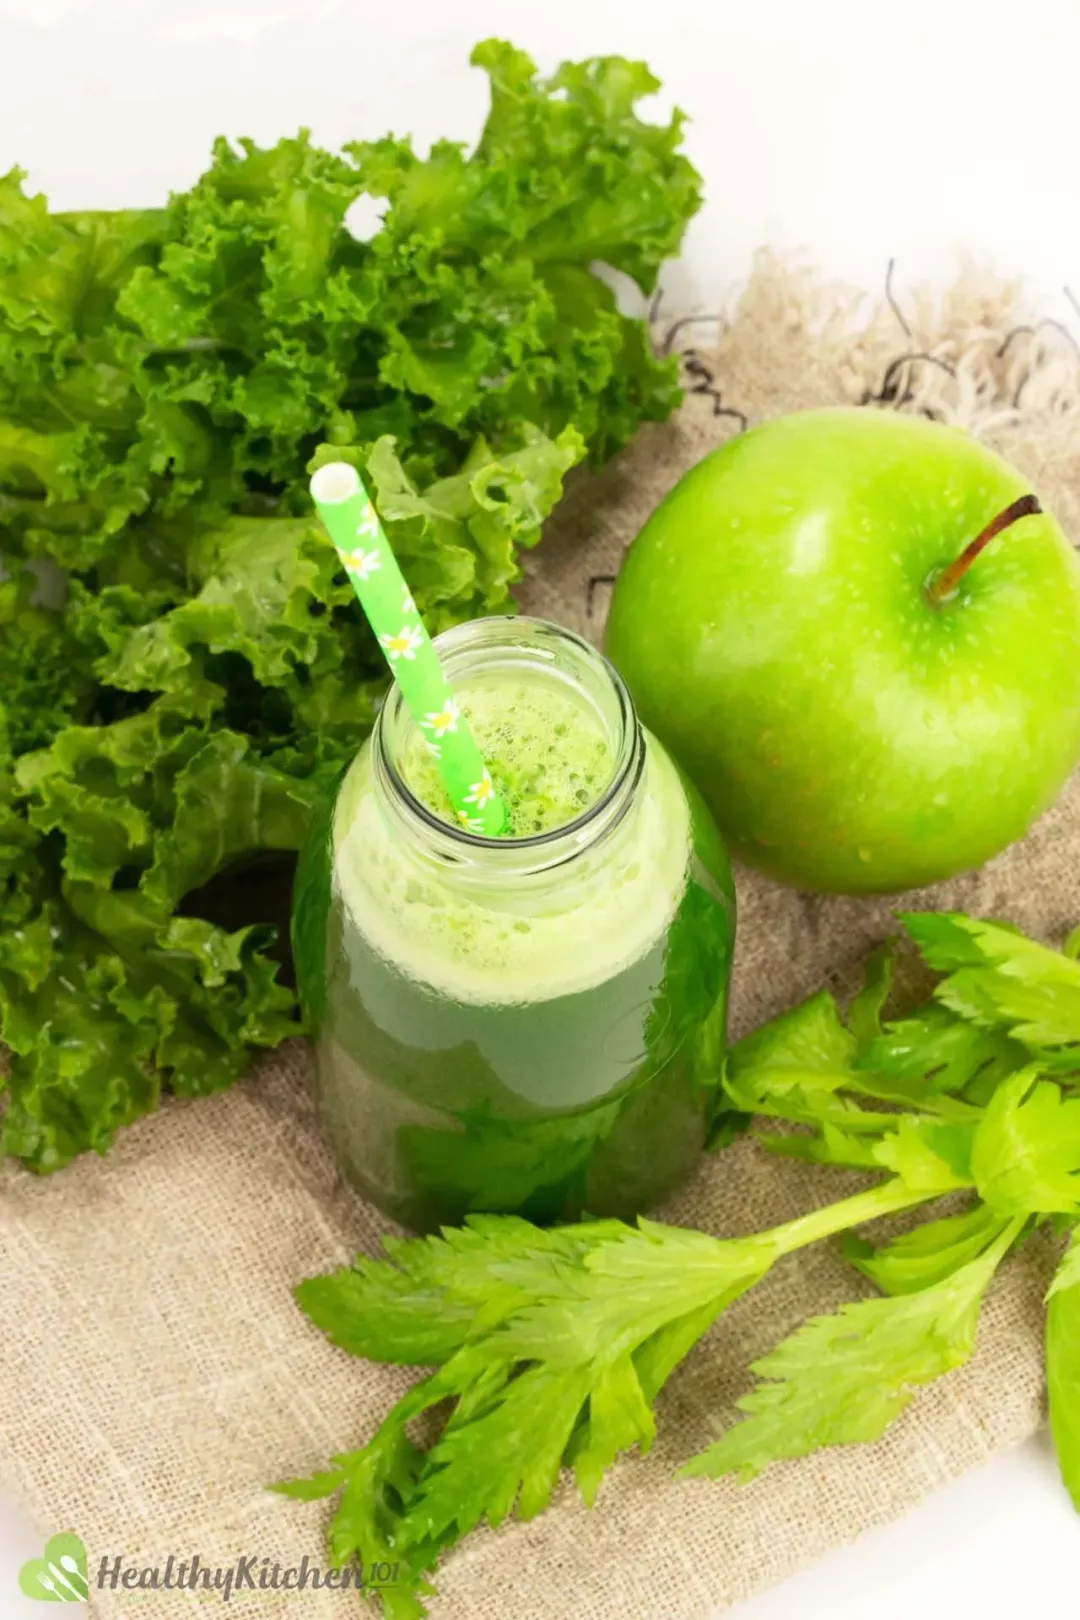 A short bottle of green vegetable juice with a green straw placed on a piece of fabric along with celery leaves, kale, and a whole green apple 